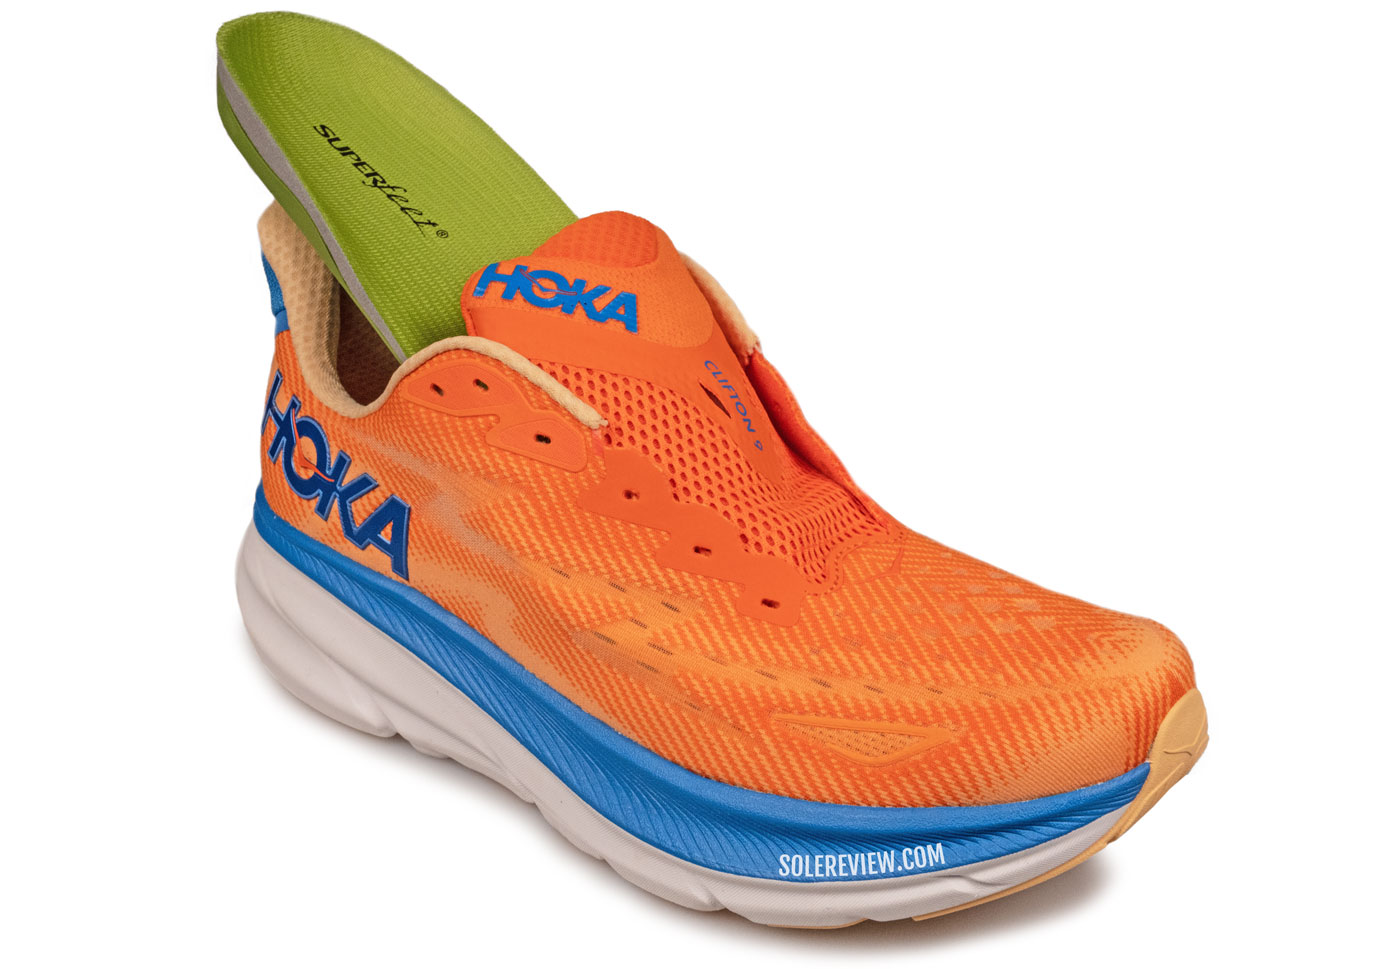 The Hoka Clifton 9 with a Superfeet Green insole.